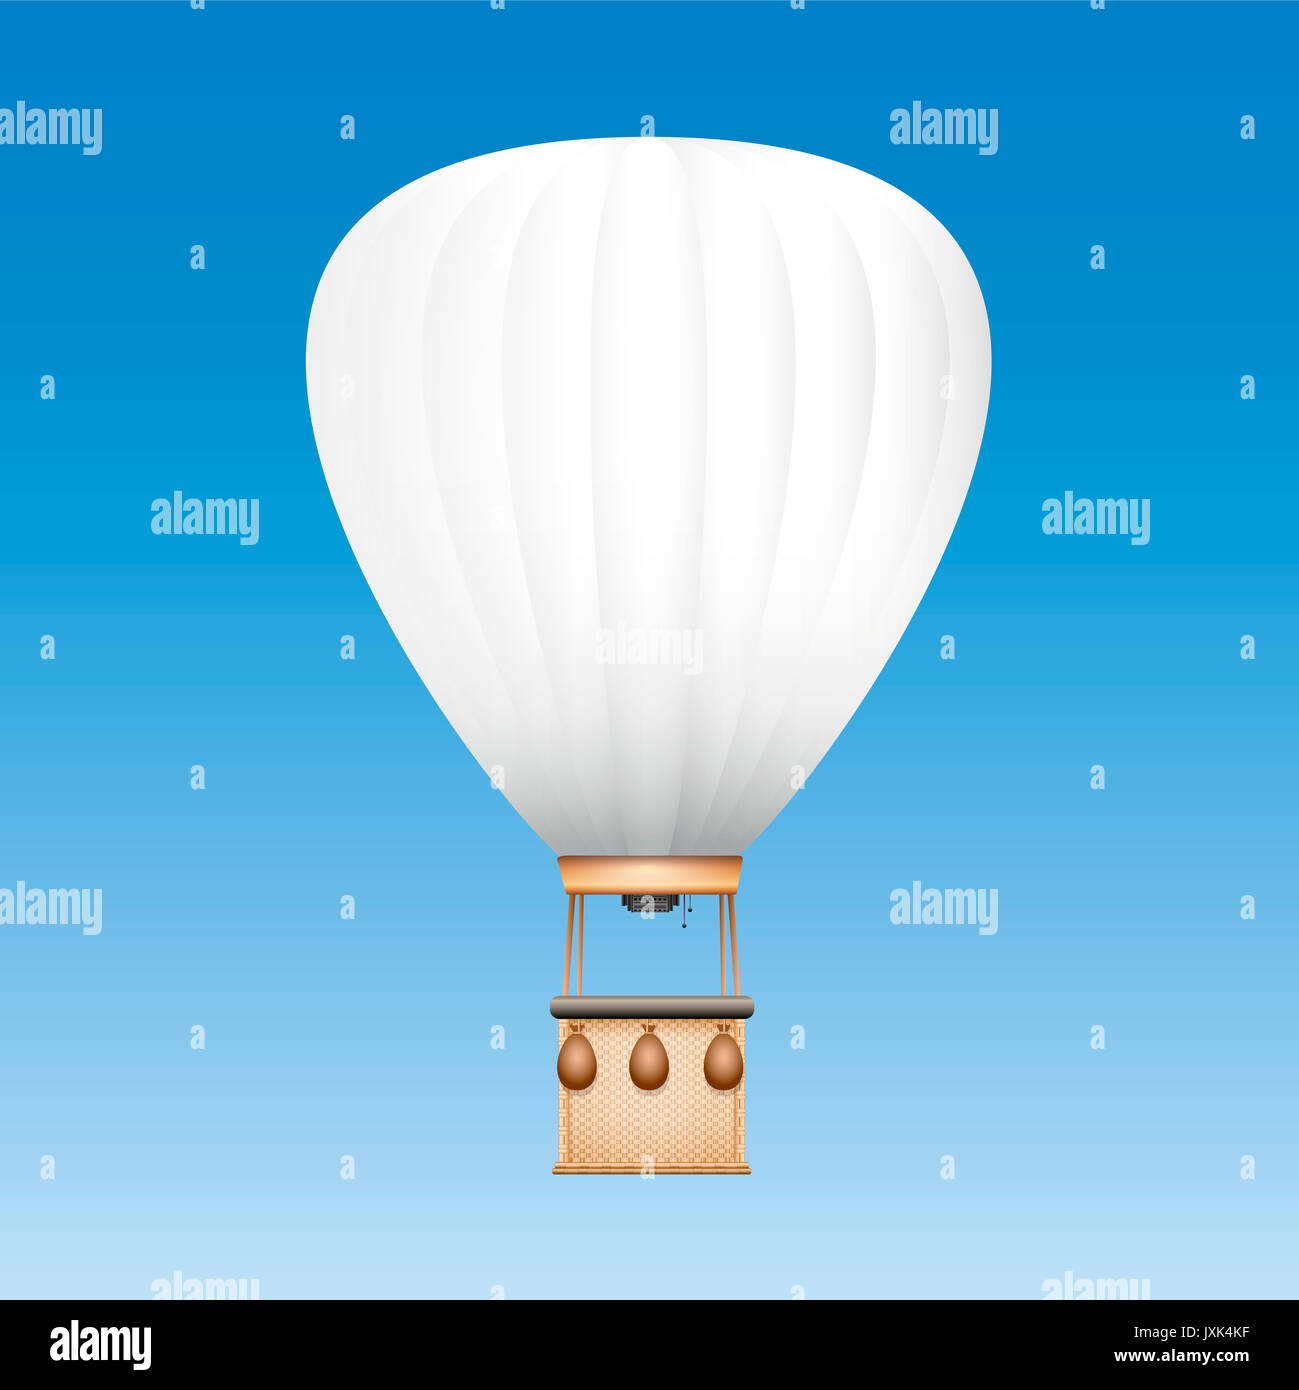 Captive balloon with white surface to be used as advertising space for text, images or your company logo - illustration on blue sky background. Stock Photo